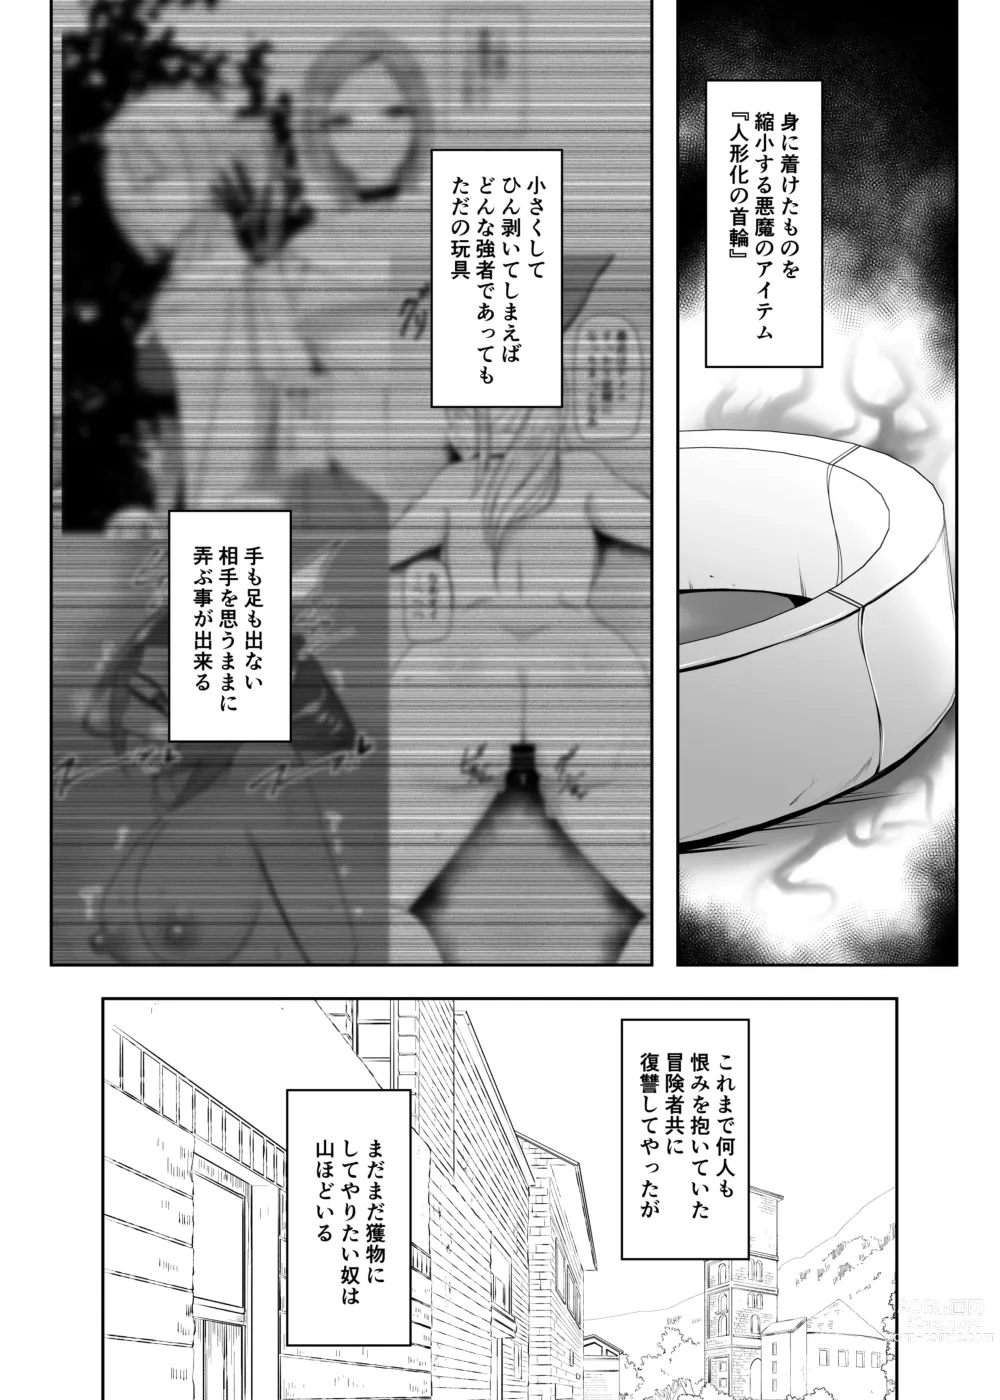 Page 2 of doujinshi Doll Turning Collar - Female Warrior